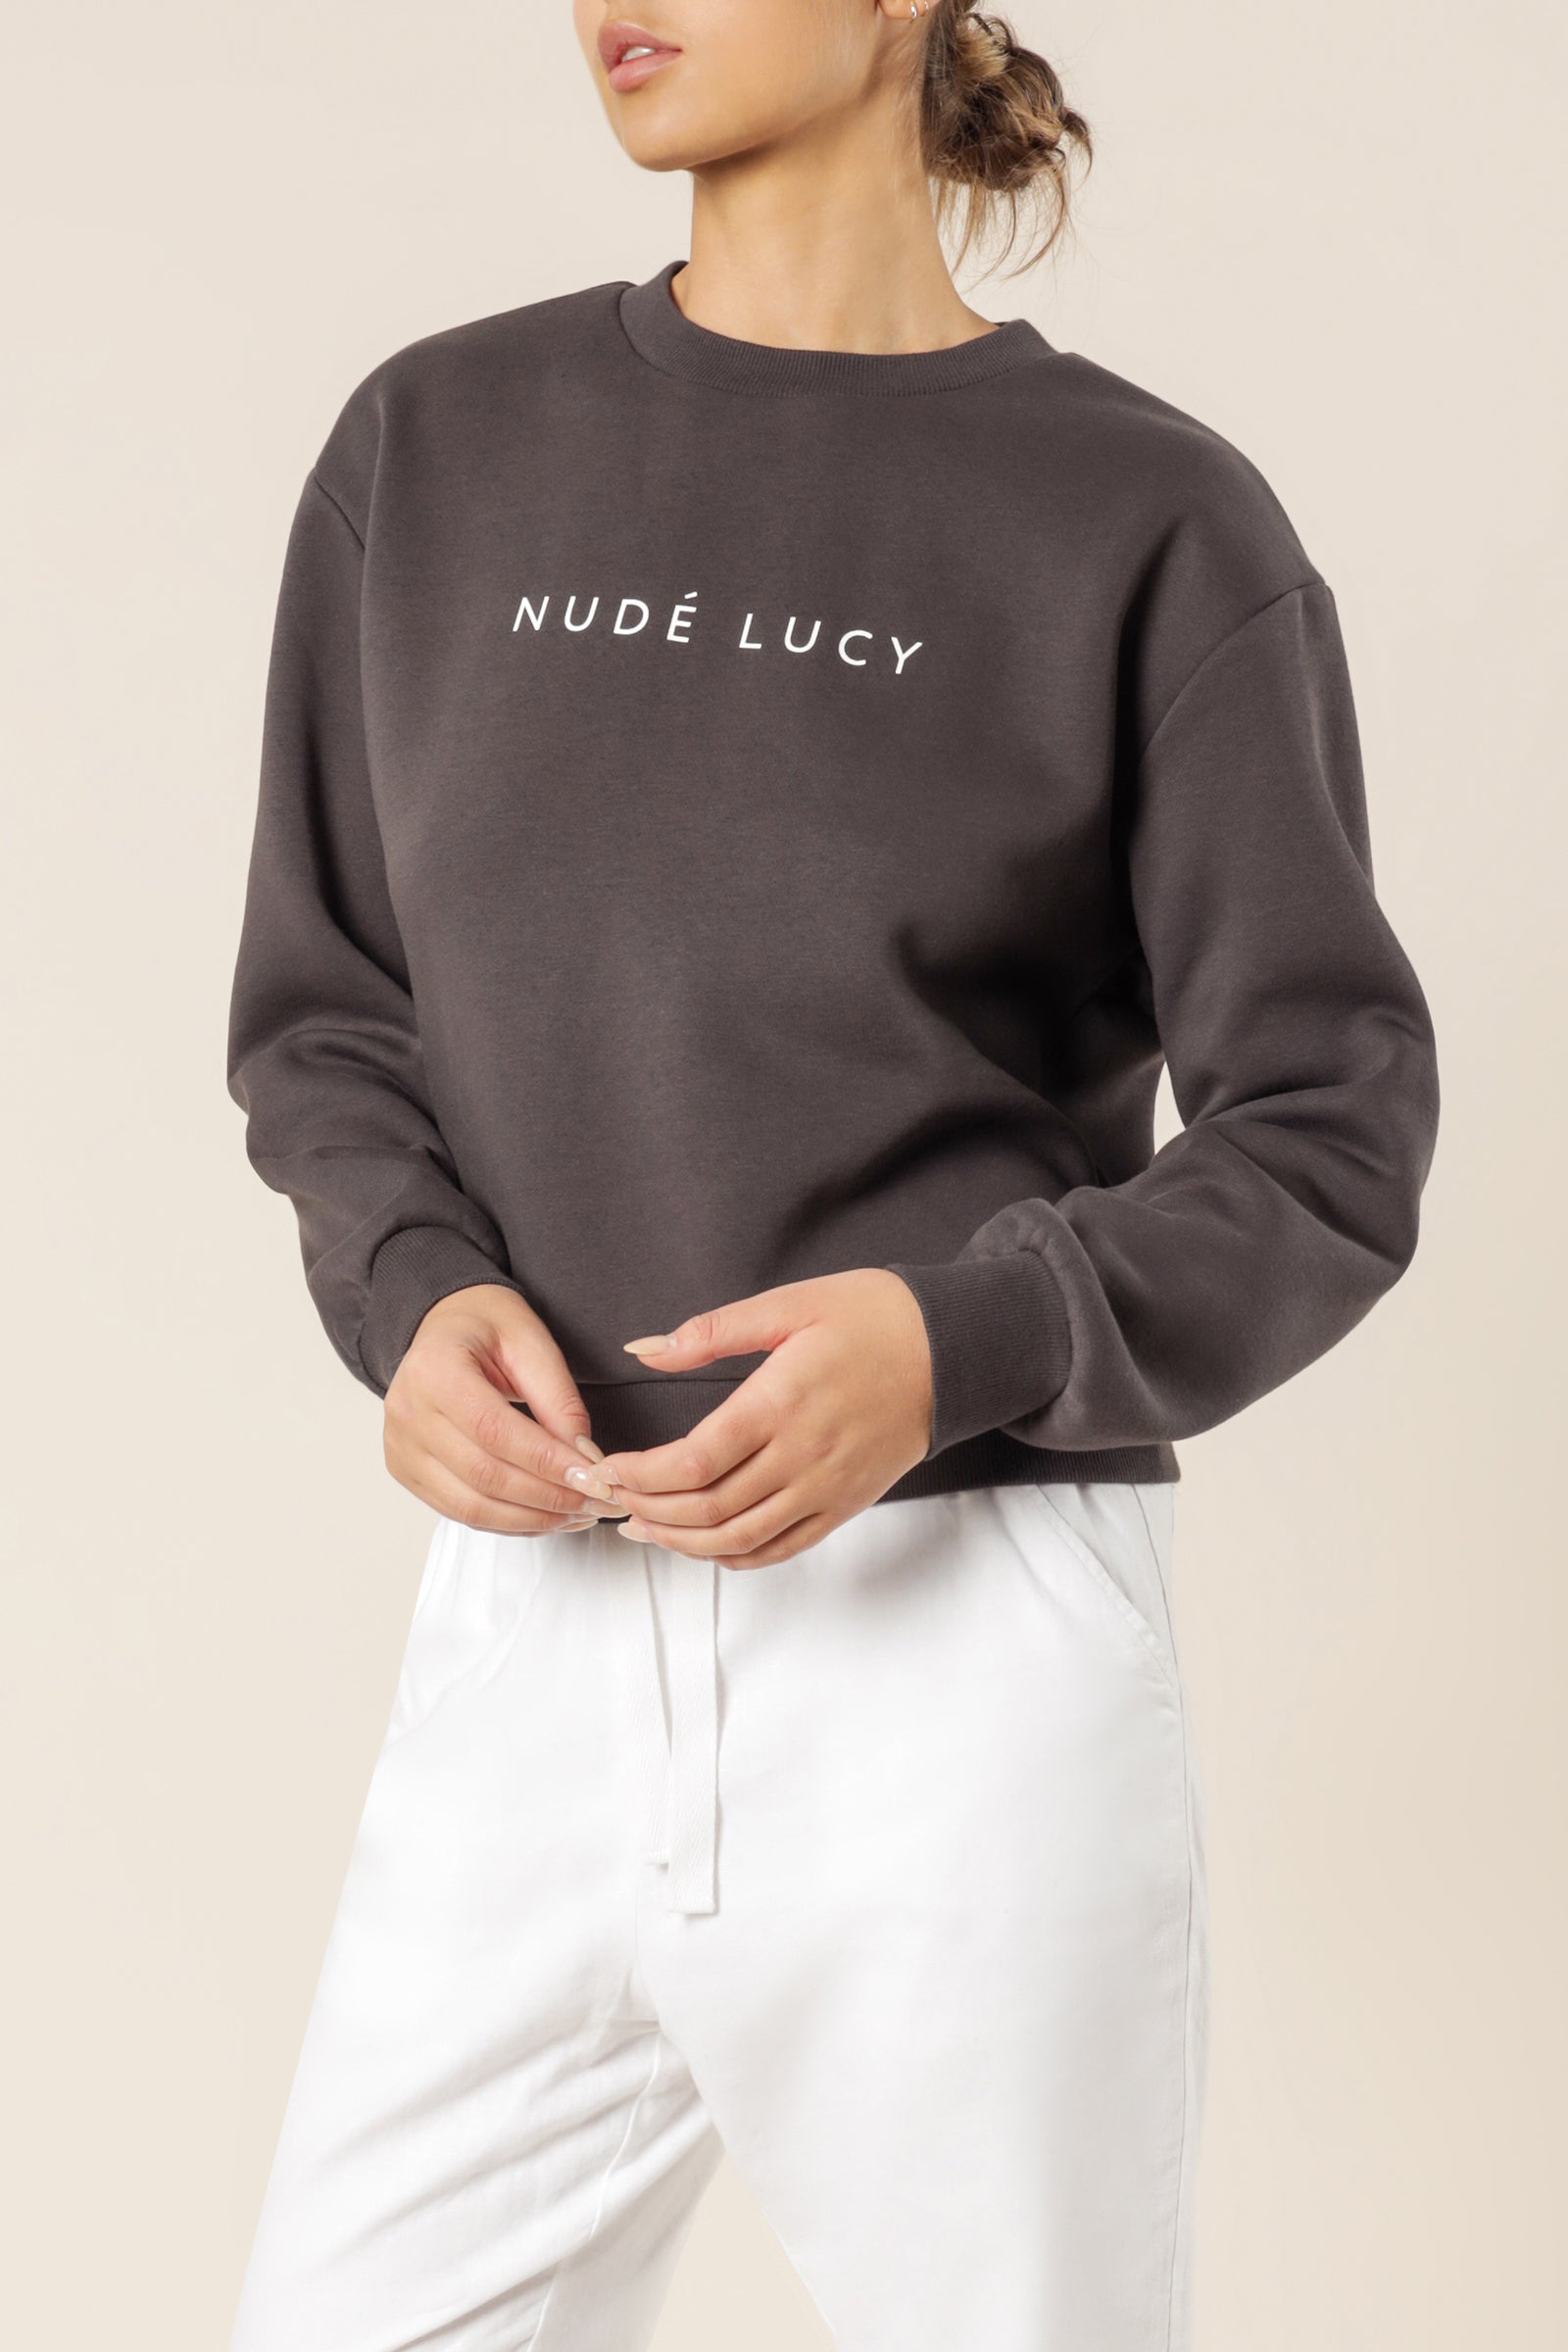 Nude Lucy Nude Lucy Slogan Sweat Coal Top 